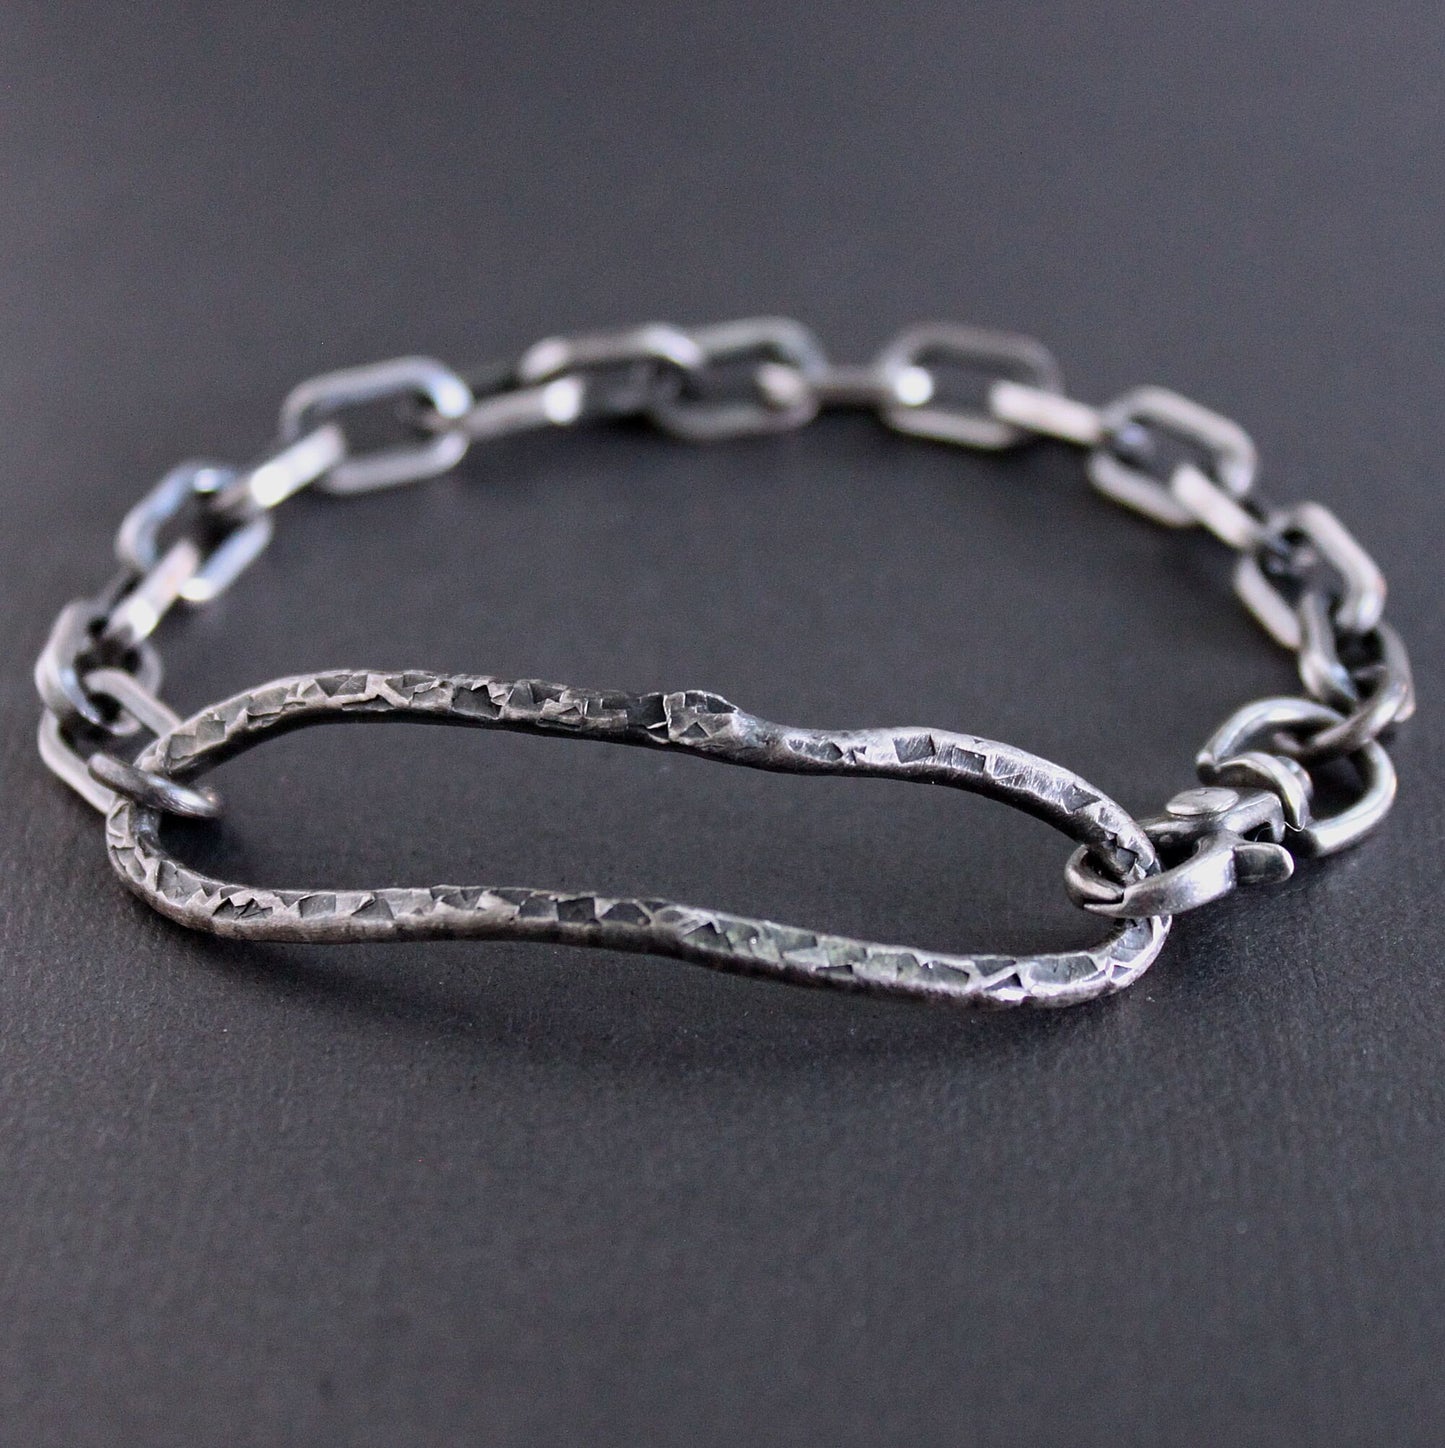 Rustic Silver Hammered Chain Bracelet